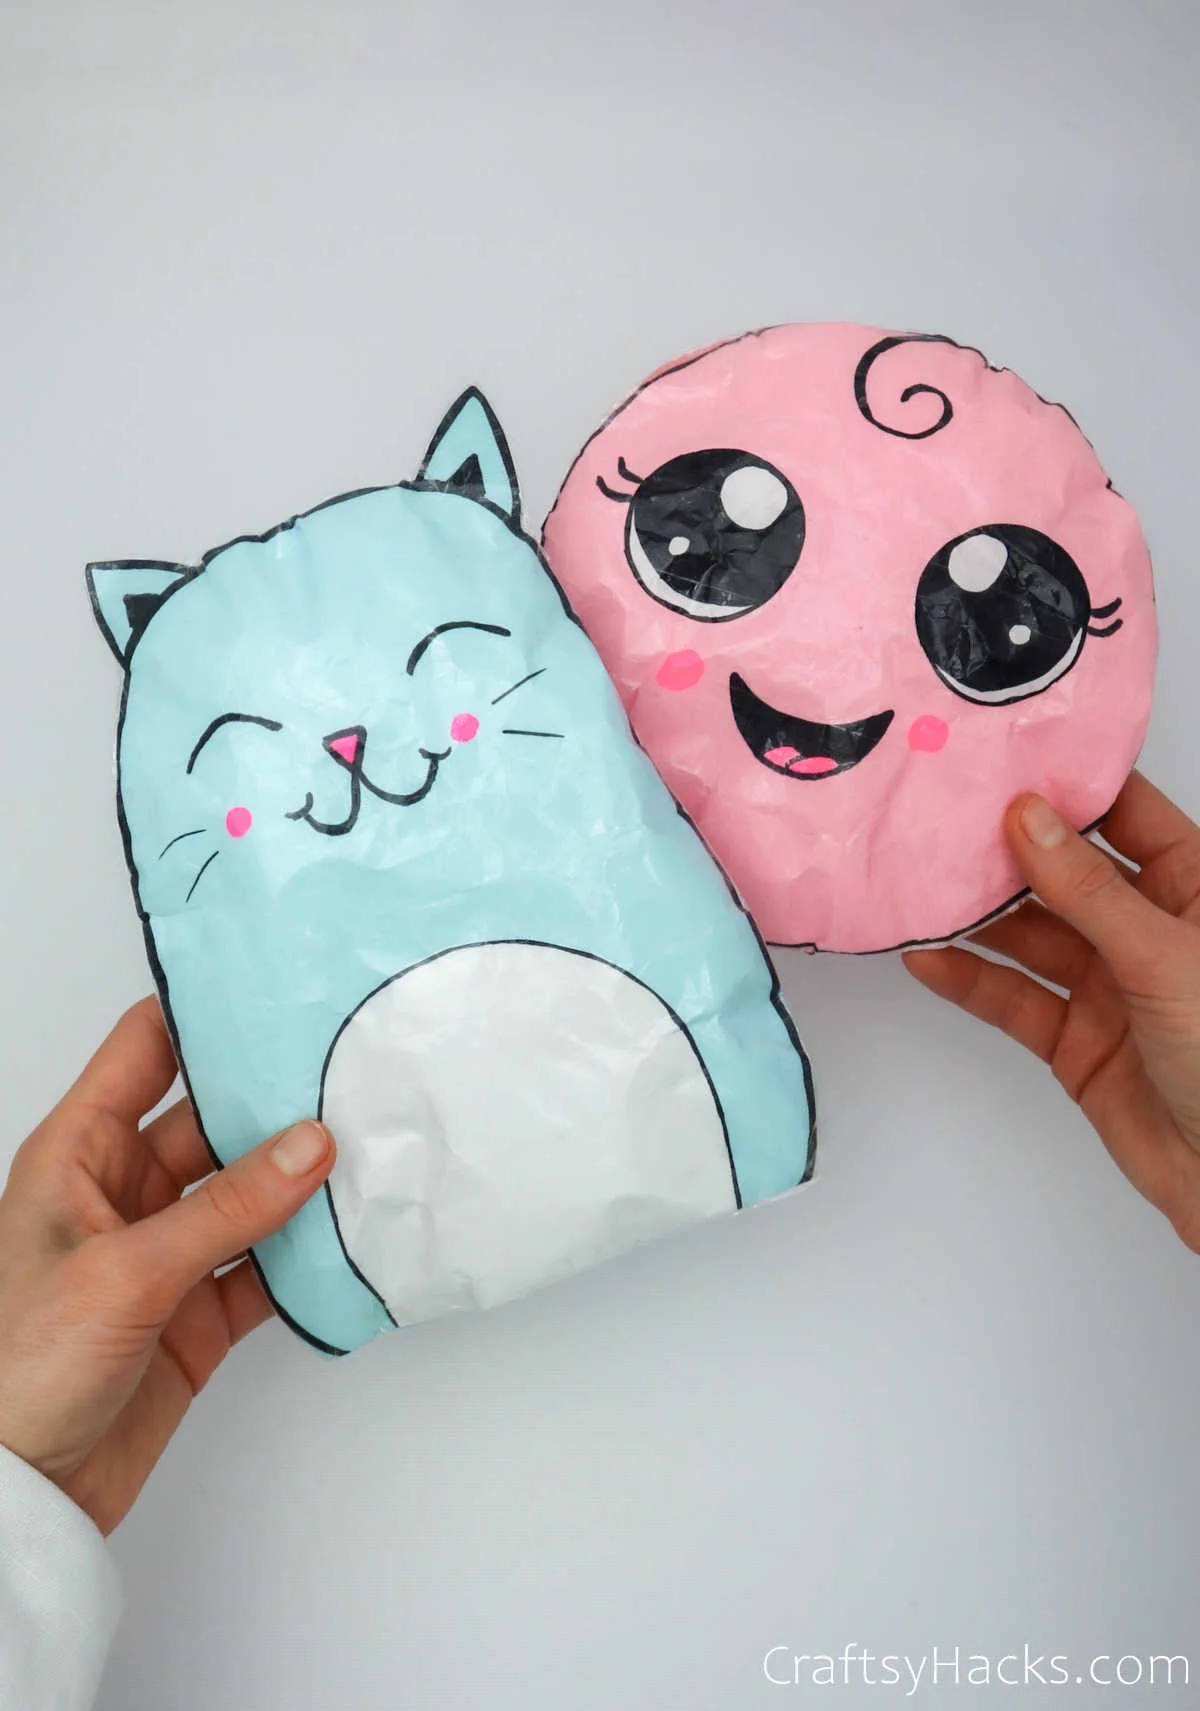 blue and pink paper squishies